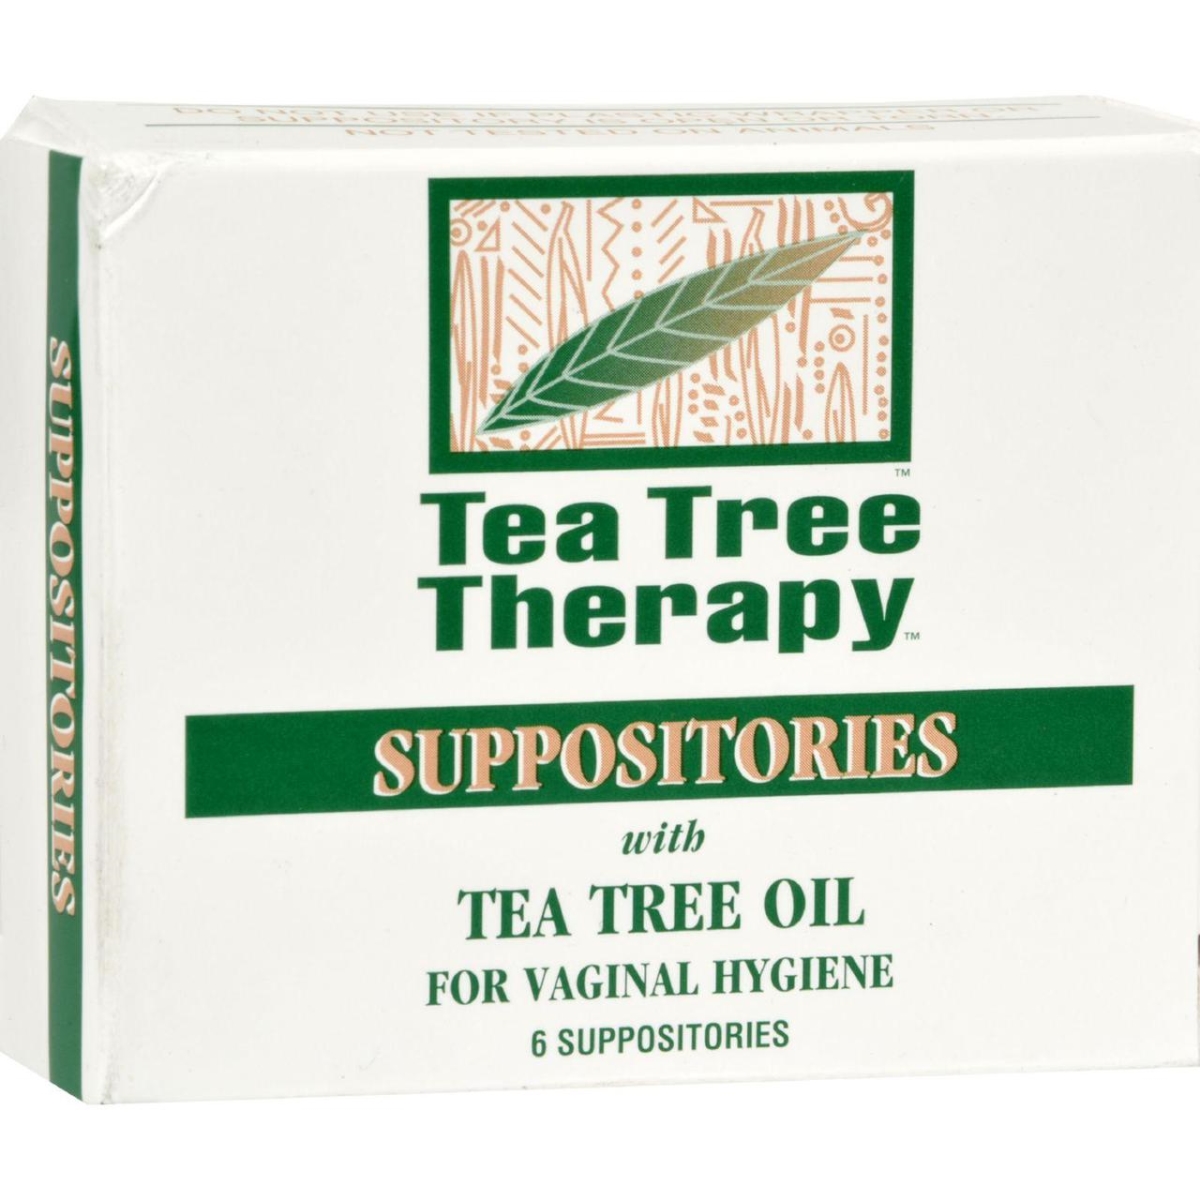 Picture of Tea Tree Therapy HG0587766 Vaginal Suppositories with Tea Tree Oil - 6 Suppositories